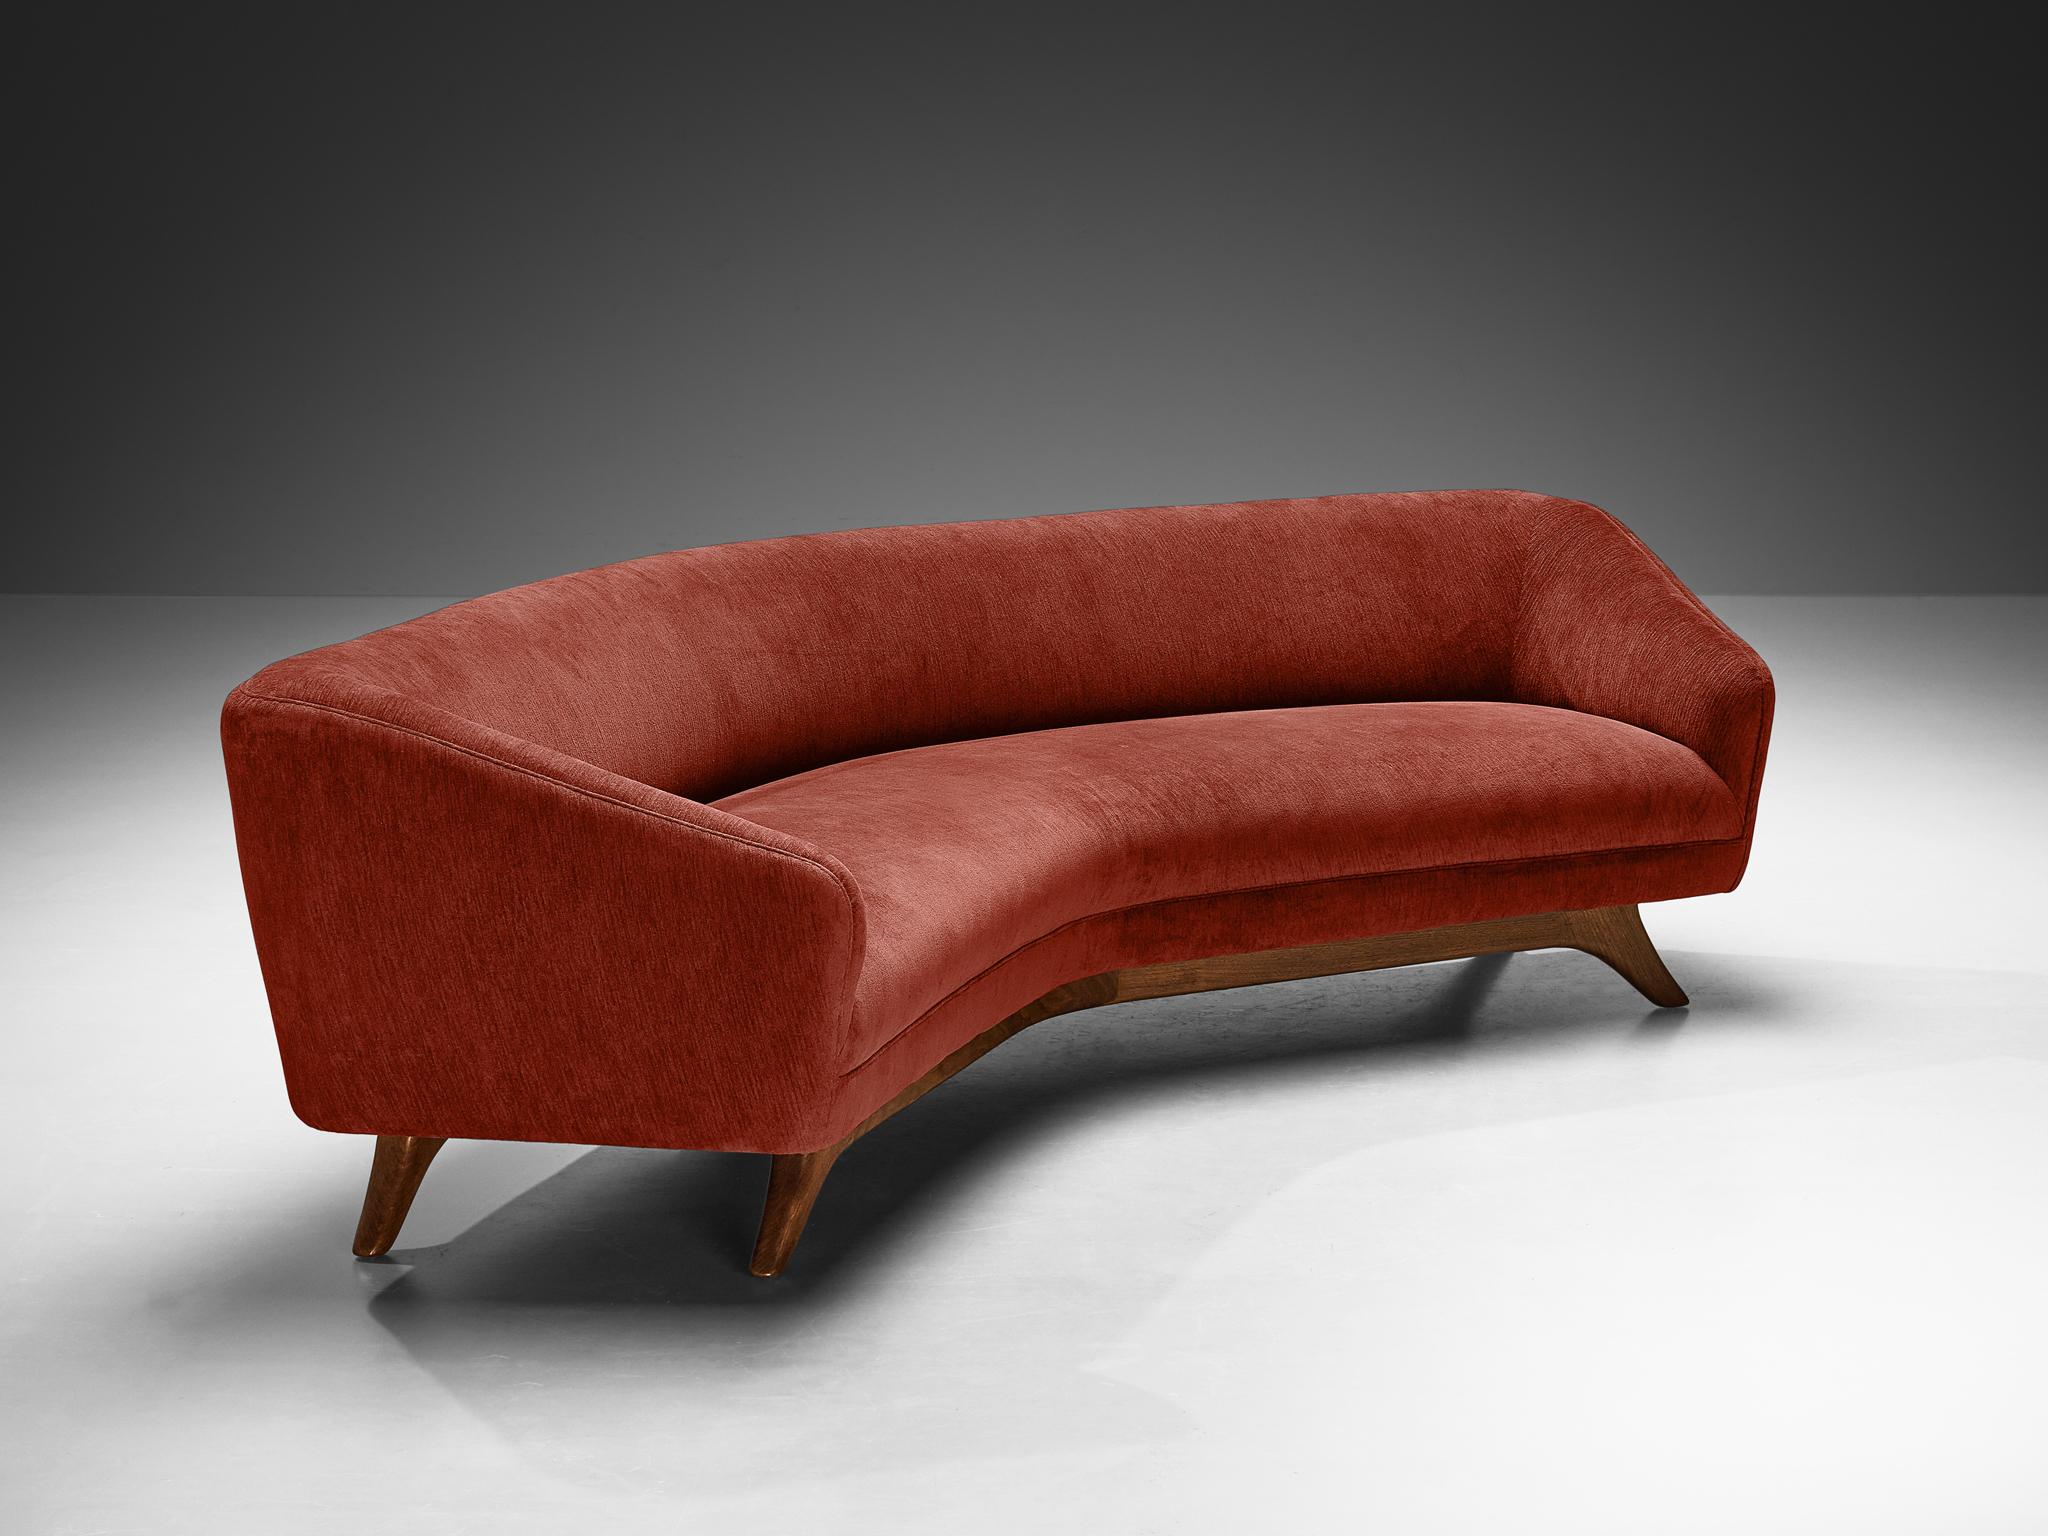 Vladimir Kagan for Vladimir Kagan Designs, Inc., ‘Wide Angle’ sofa, model ‘W 506’, fabric, walnut, United States, circa 1970

This rare ‘Wide Angle’ sofa is designed by Vladimir Kagan around the 1970s. The construction is defined by a boomerang